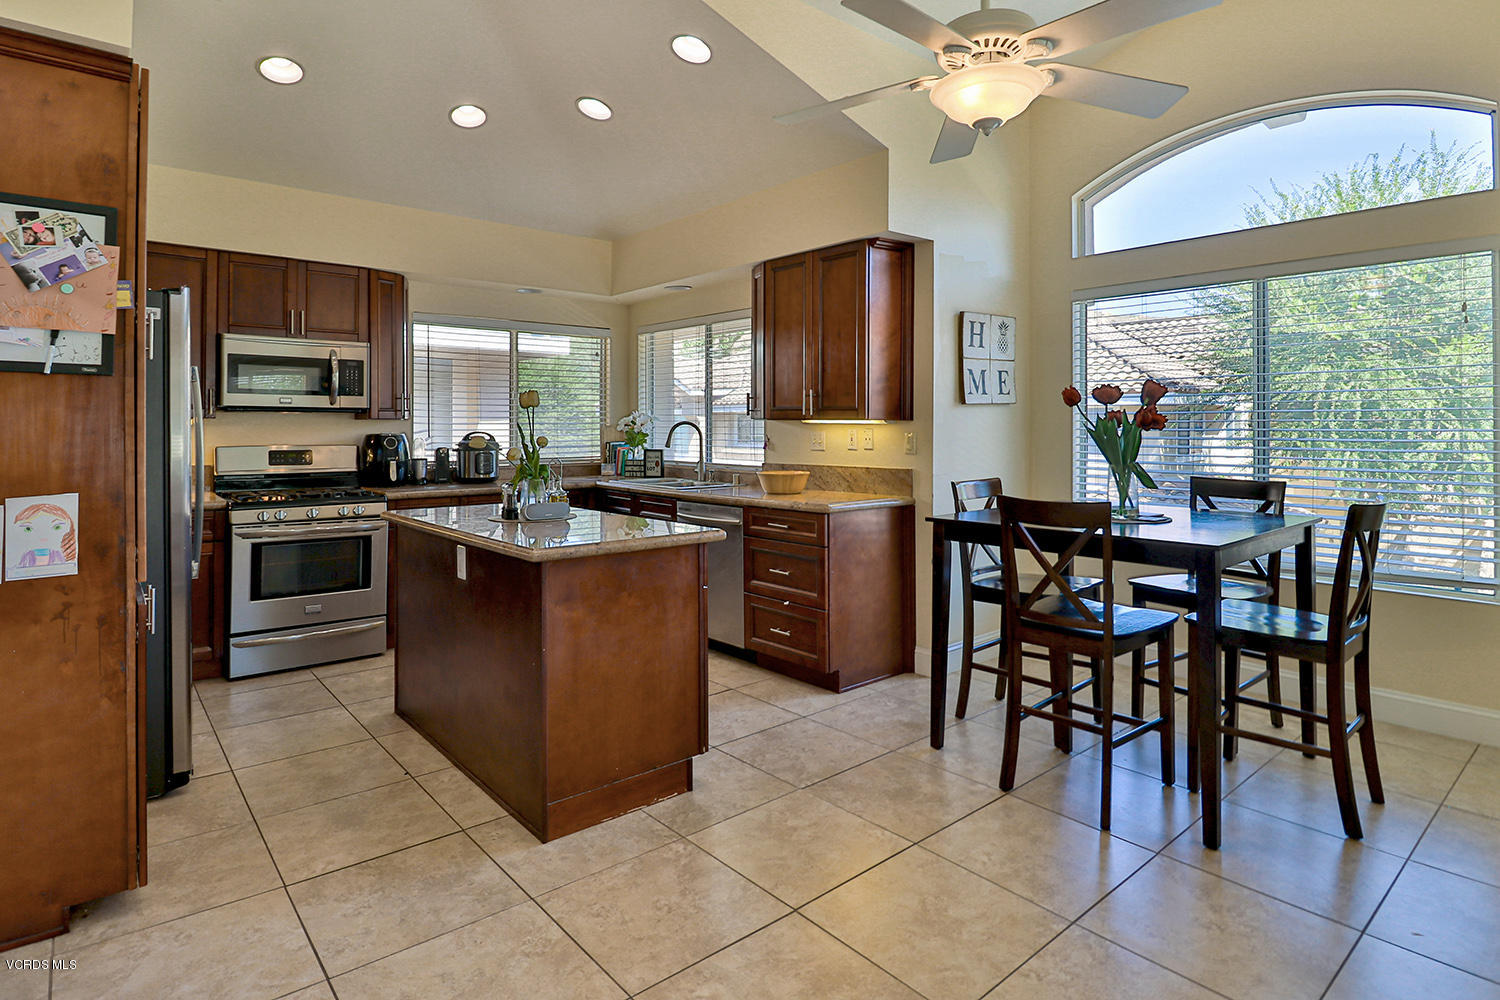 a kitchen with stainless steel appliances granite countertop wooden cabinets a dining table and chairs